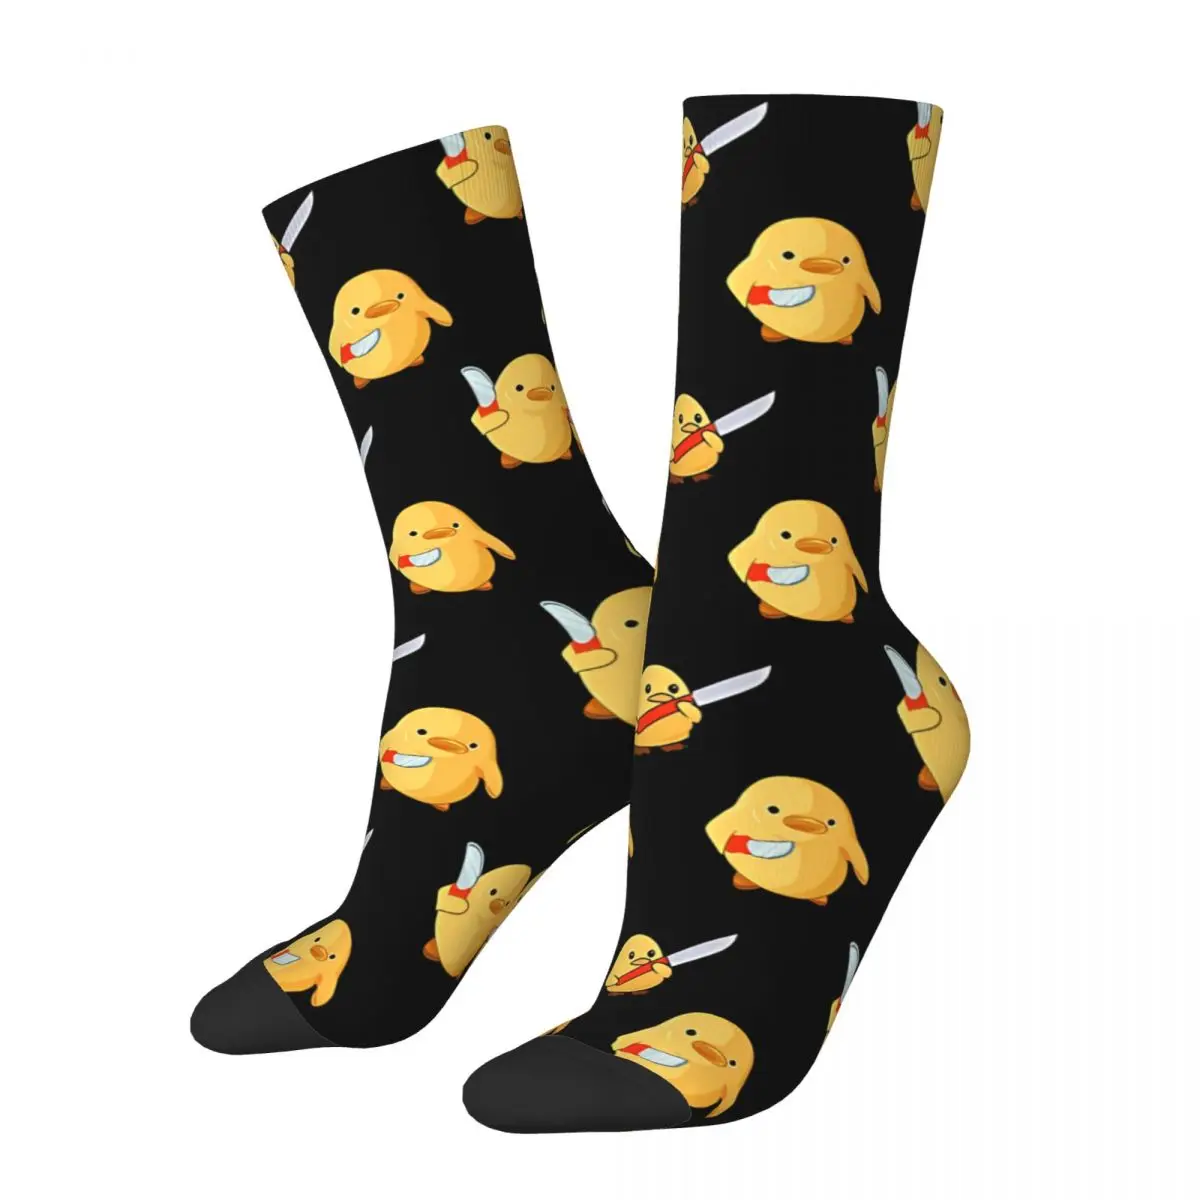 Funny Men's Socks Duck With Knife Duck You Cute But Will Cut You Vintage Hip Hop Crazy Crew Sock Gift Pattern Printed